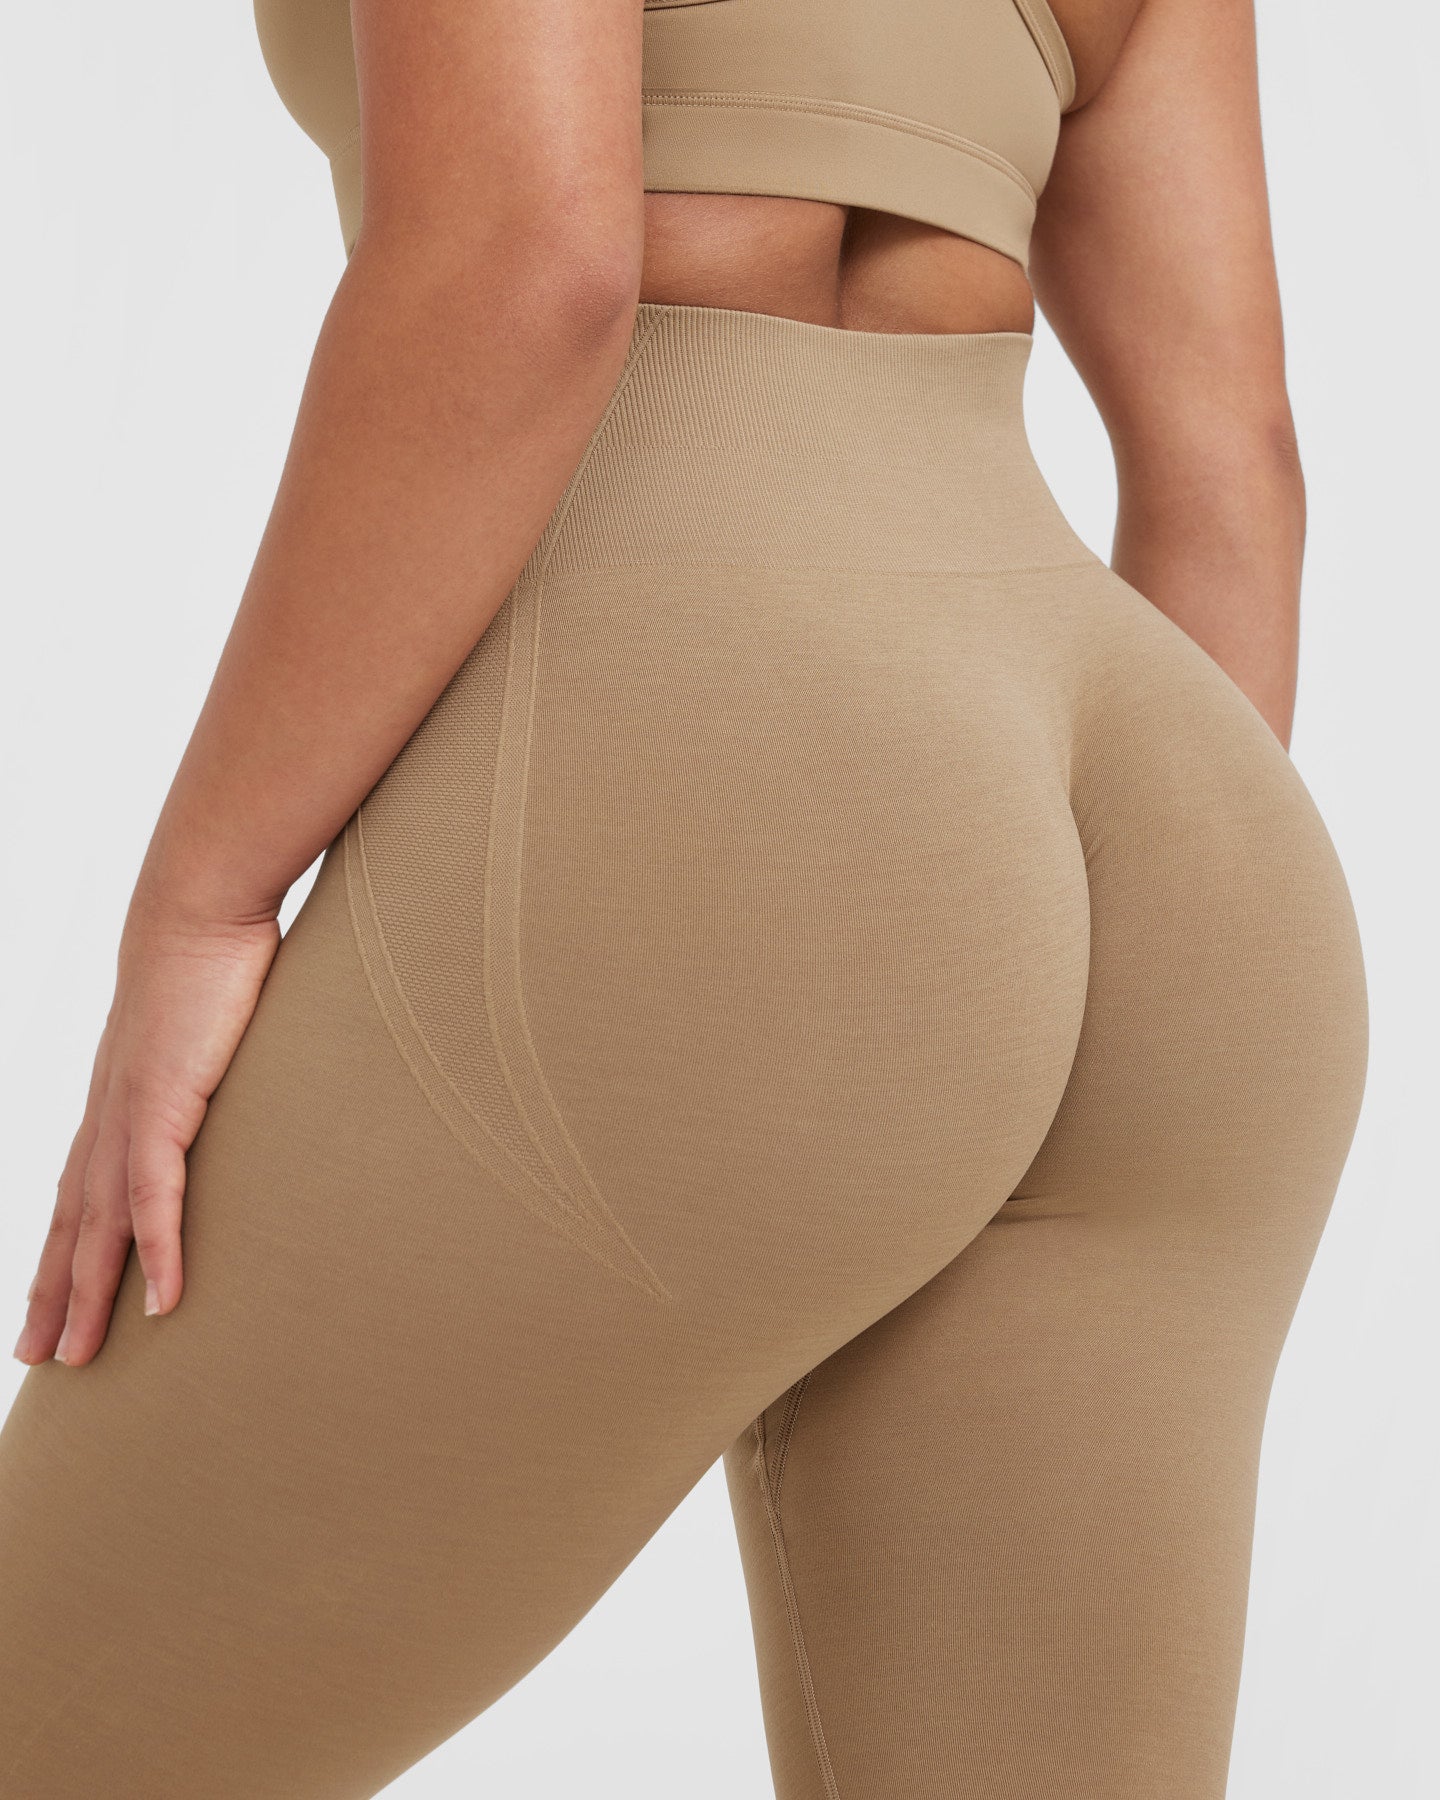 Womens Effortless Seamless Oner Active Leggings For Workout, Yoga, And Gym  Scrunch Bum Pants For Active And Comfortable Wear Style #230918 From Bai04,  $17.98